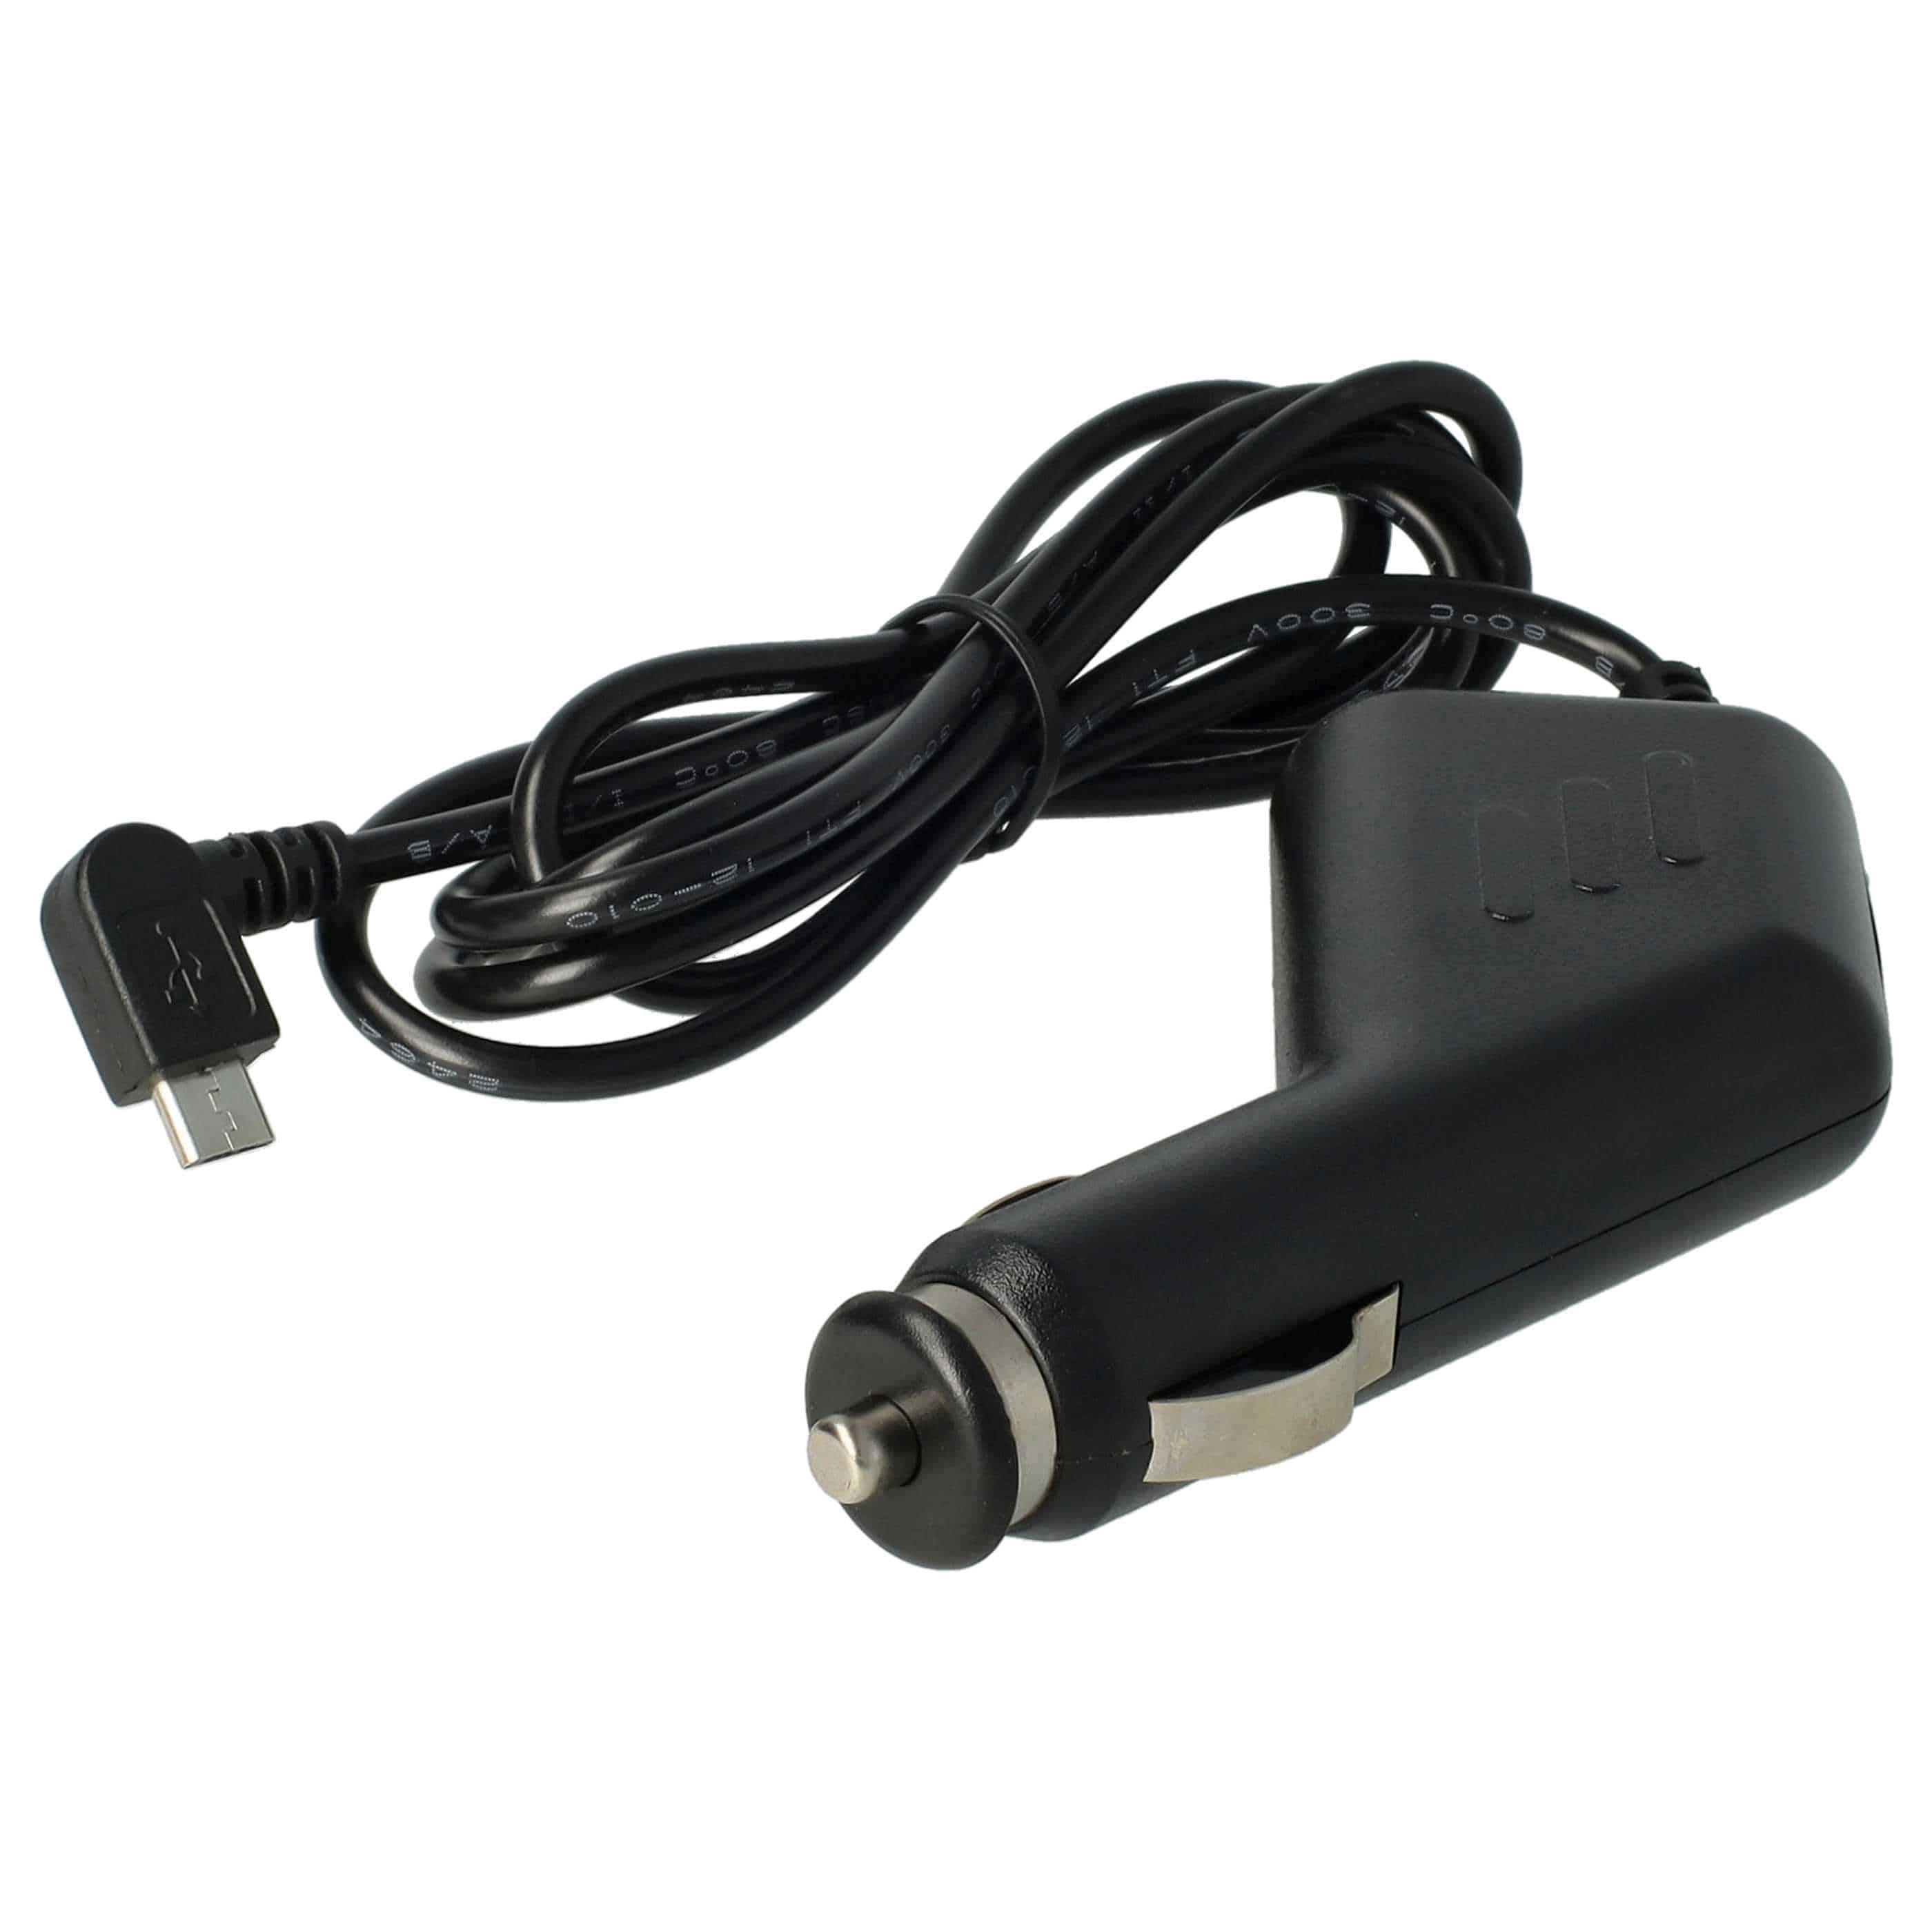 Micro-USB Car Charger Cable 1.0 A suitable for C150 Bea-fonDevices like Smartphone, GPS, Sat Navs, 90° Plug